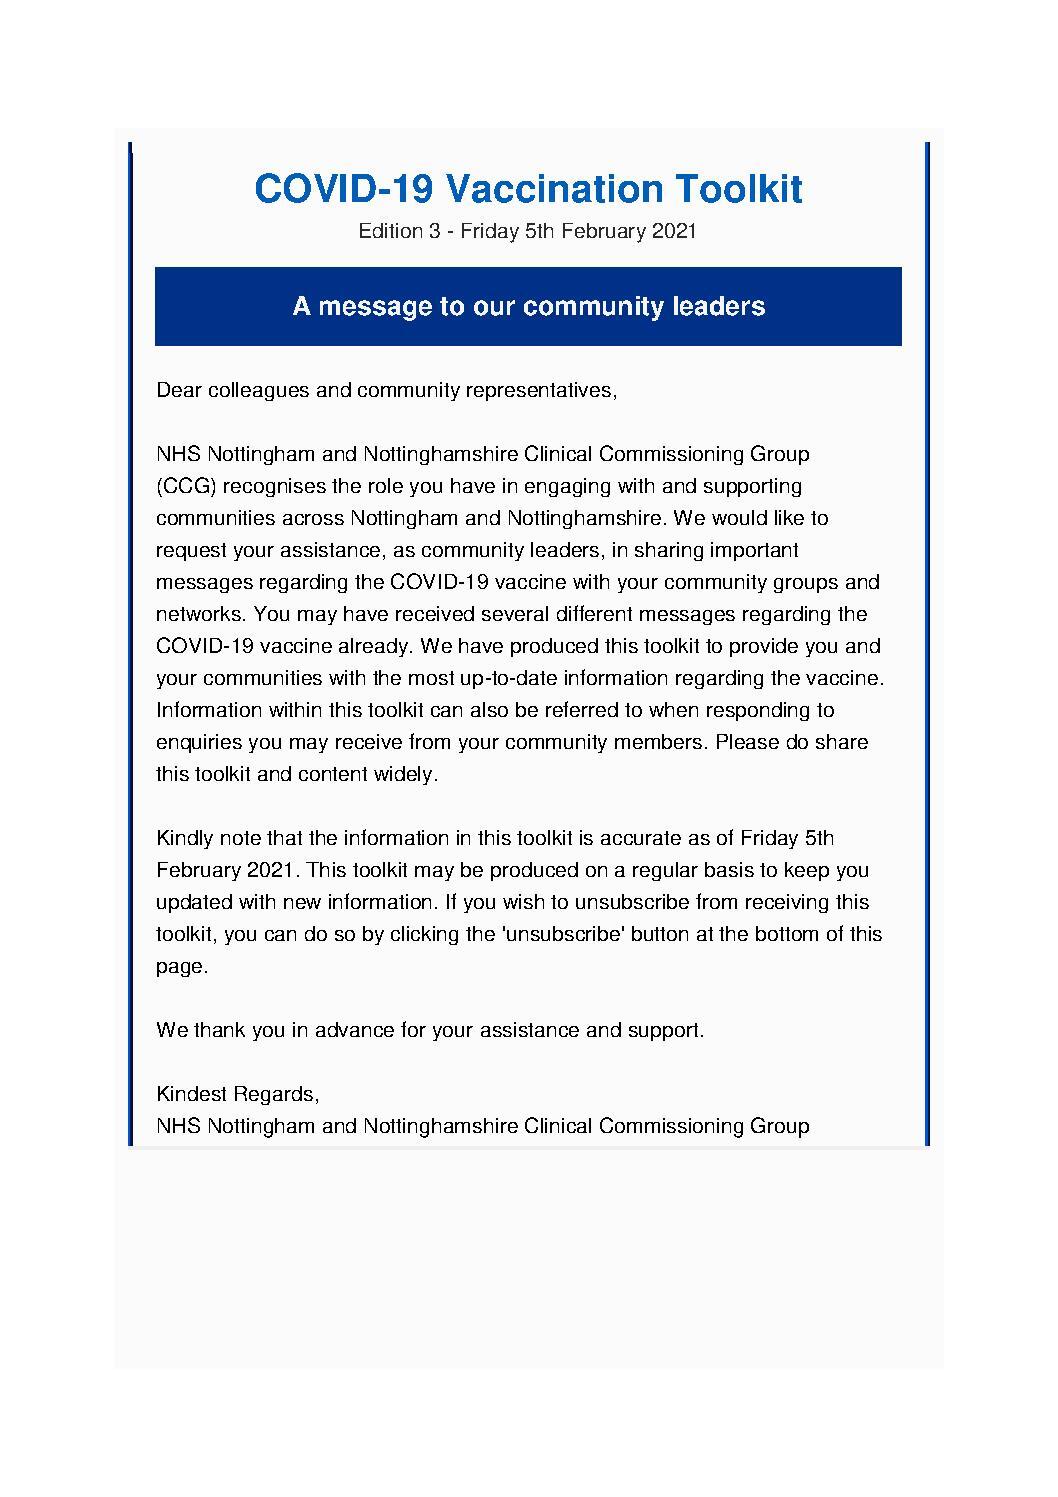 Covid -19 Vaccination Toolkit Edition 3 (5 February 2021)